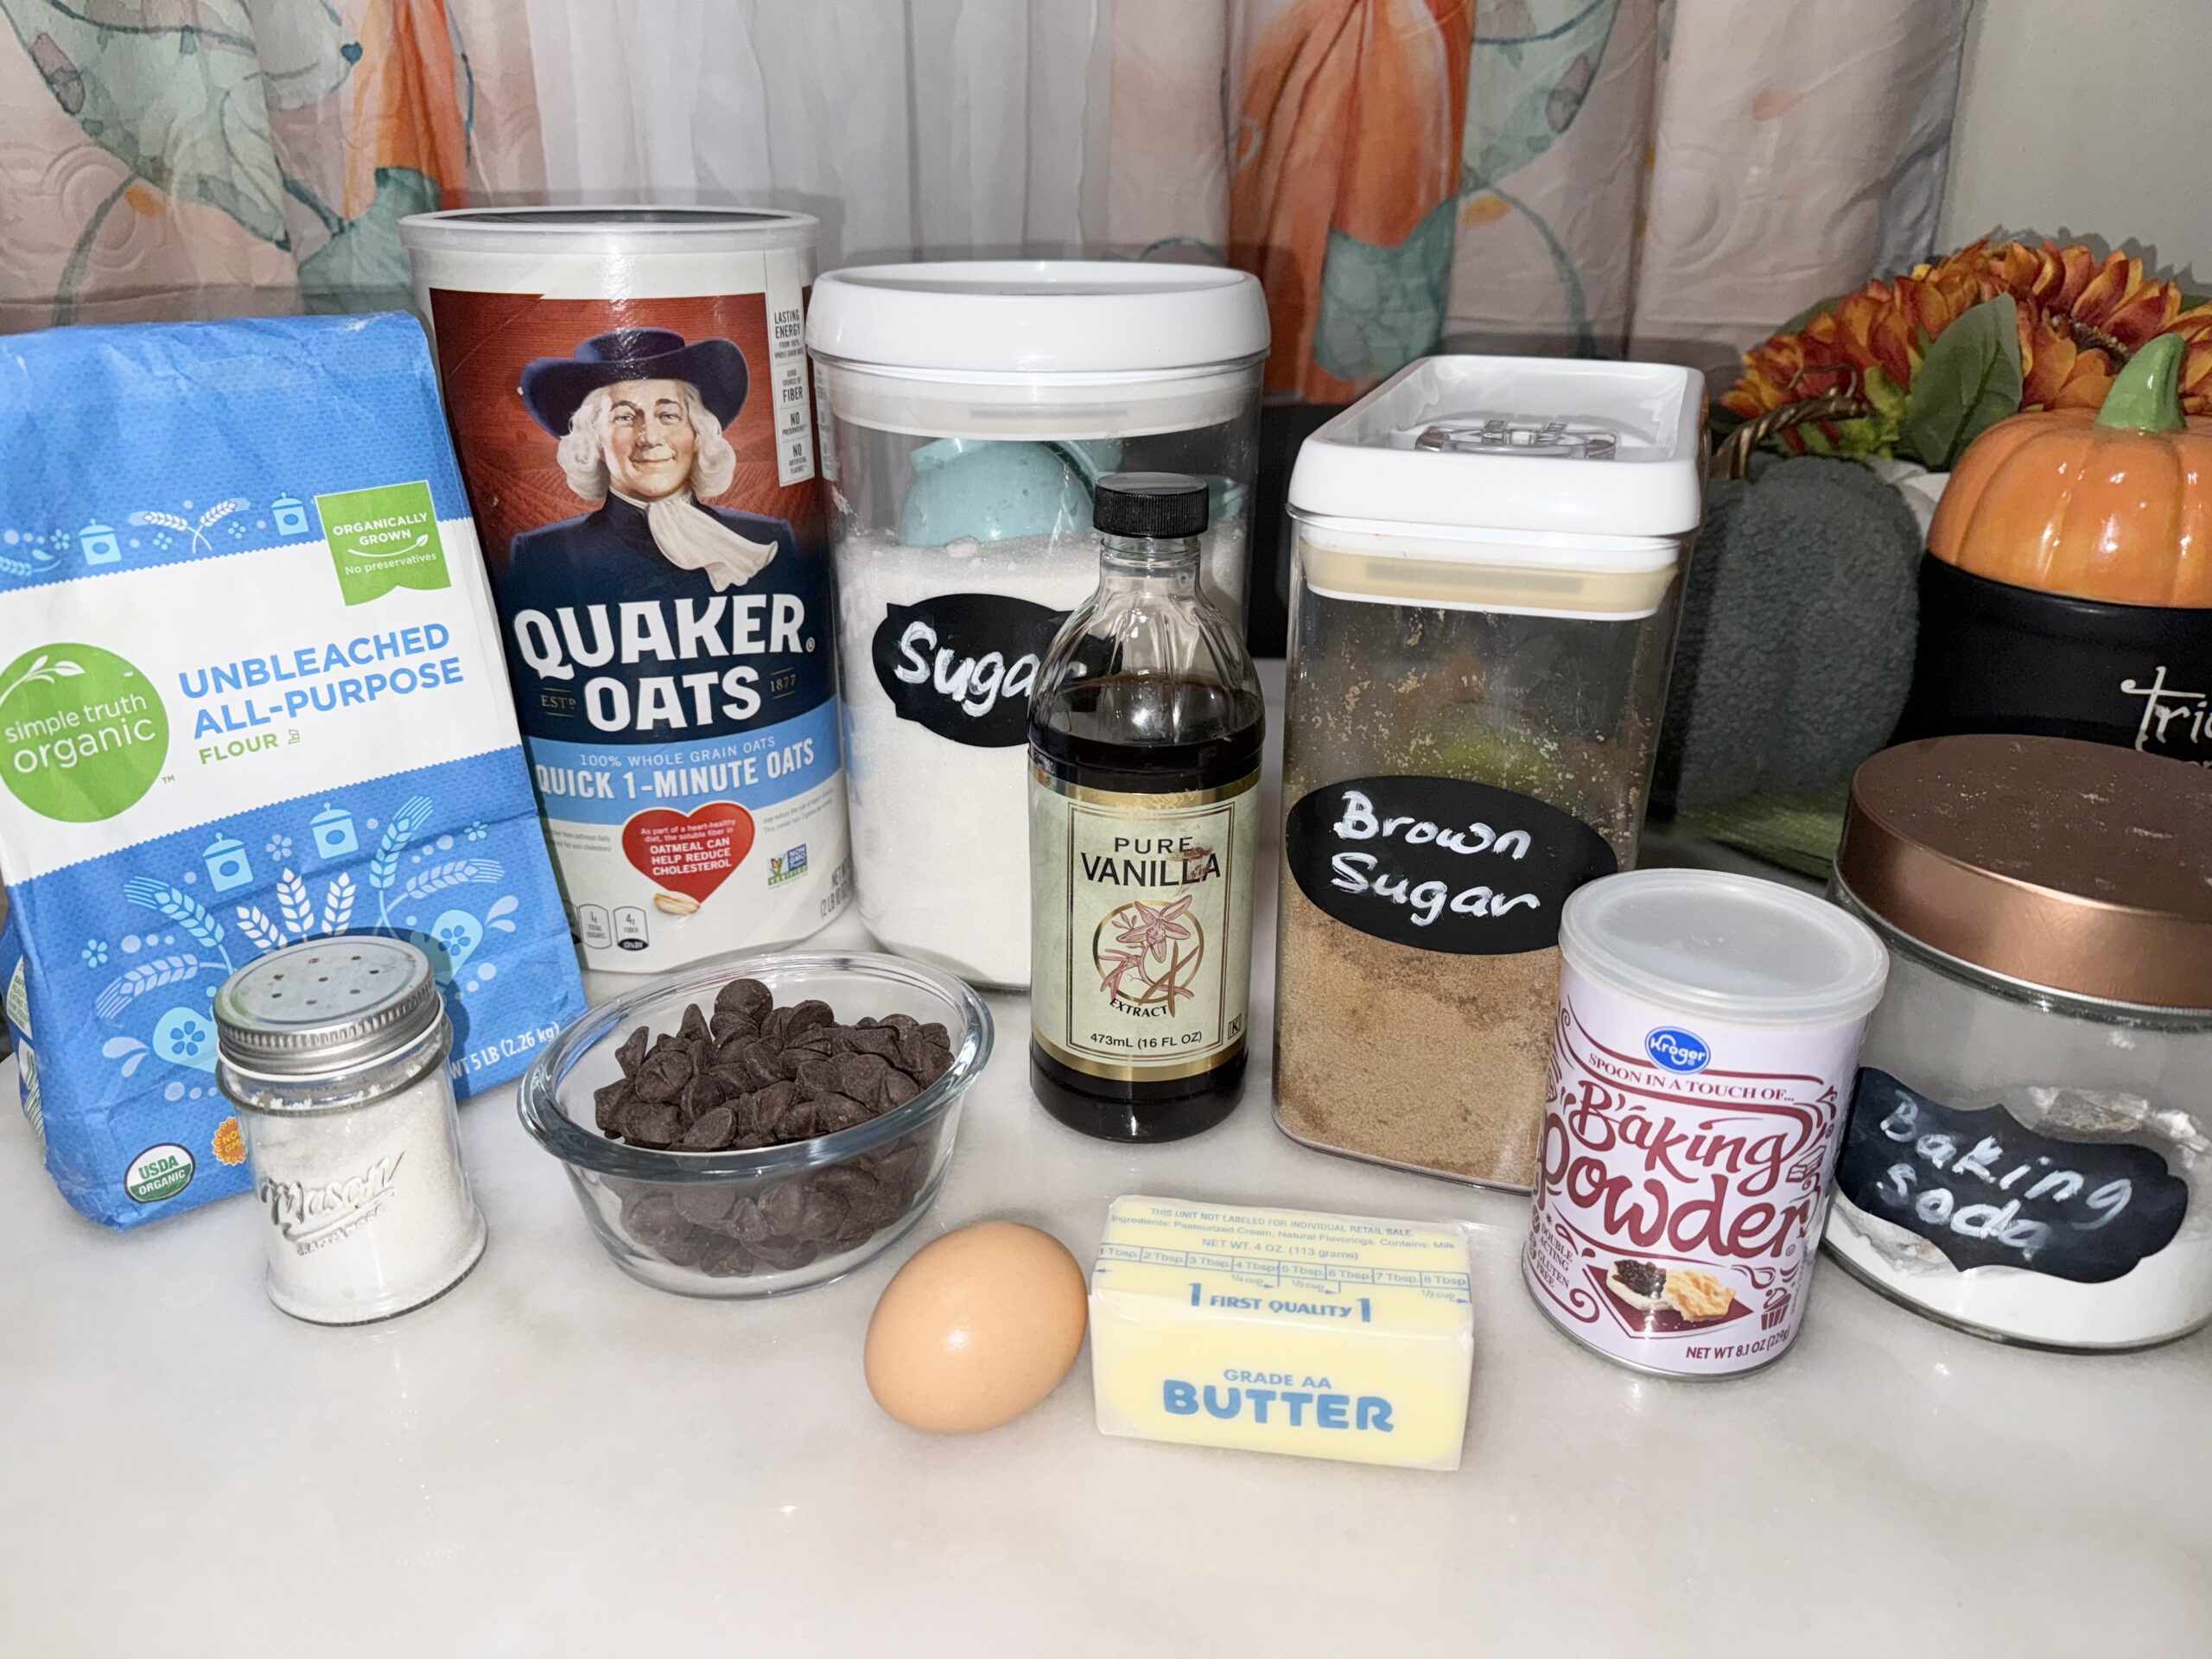 INGREDIENTS FOR OATMEAL CHOCOLATEC HIP COOKIES